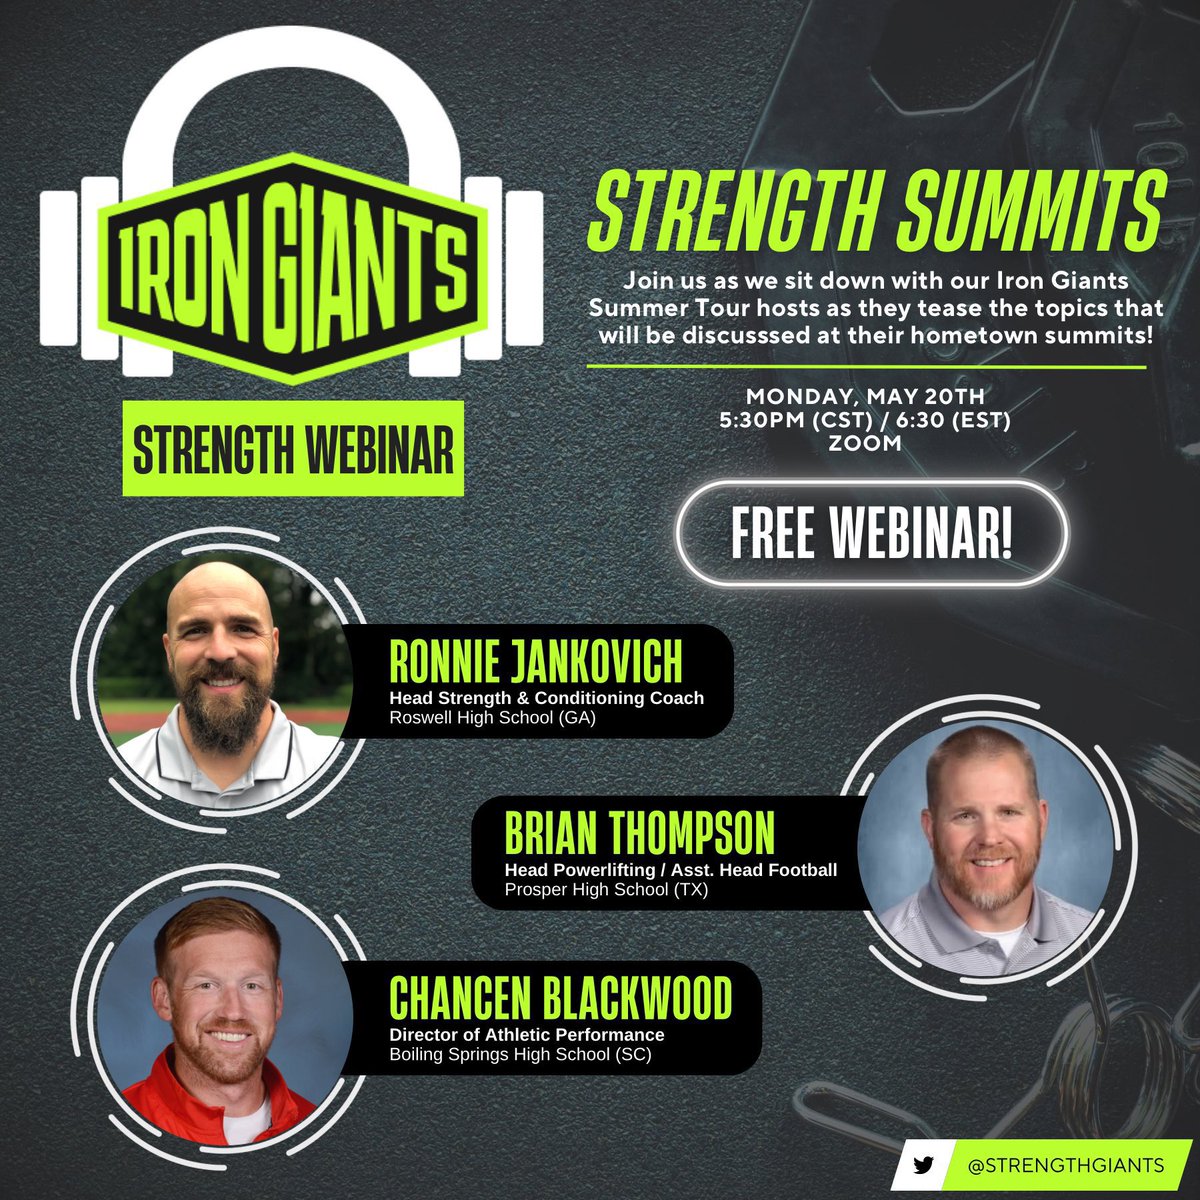 🚨TOMORROW!🚨 We’ve got a FREE Strength Webinar coming your way tomorrow night! Join us to hear the 3 awesome hosts of the upcoming Iron Giants Strength Summits talking shop and teasing topics that will be discussed at the summits. 🔥 🔗Register here: rackperformance.zoom.us/webinar/regist…